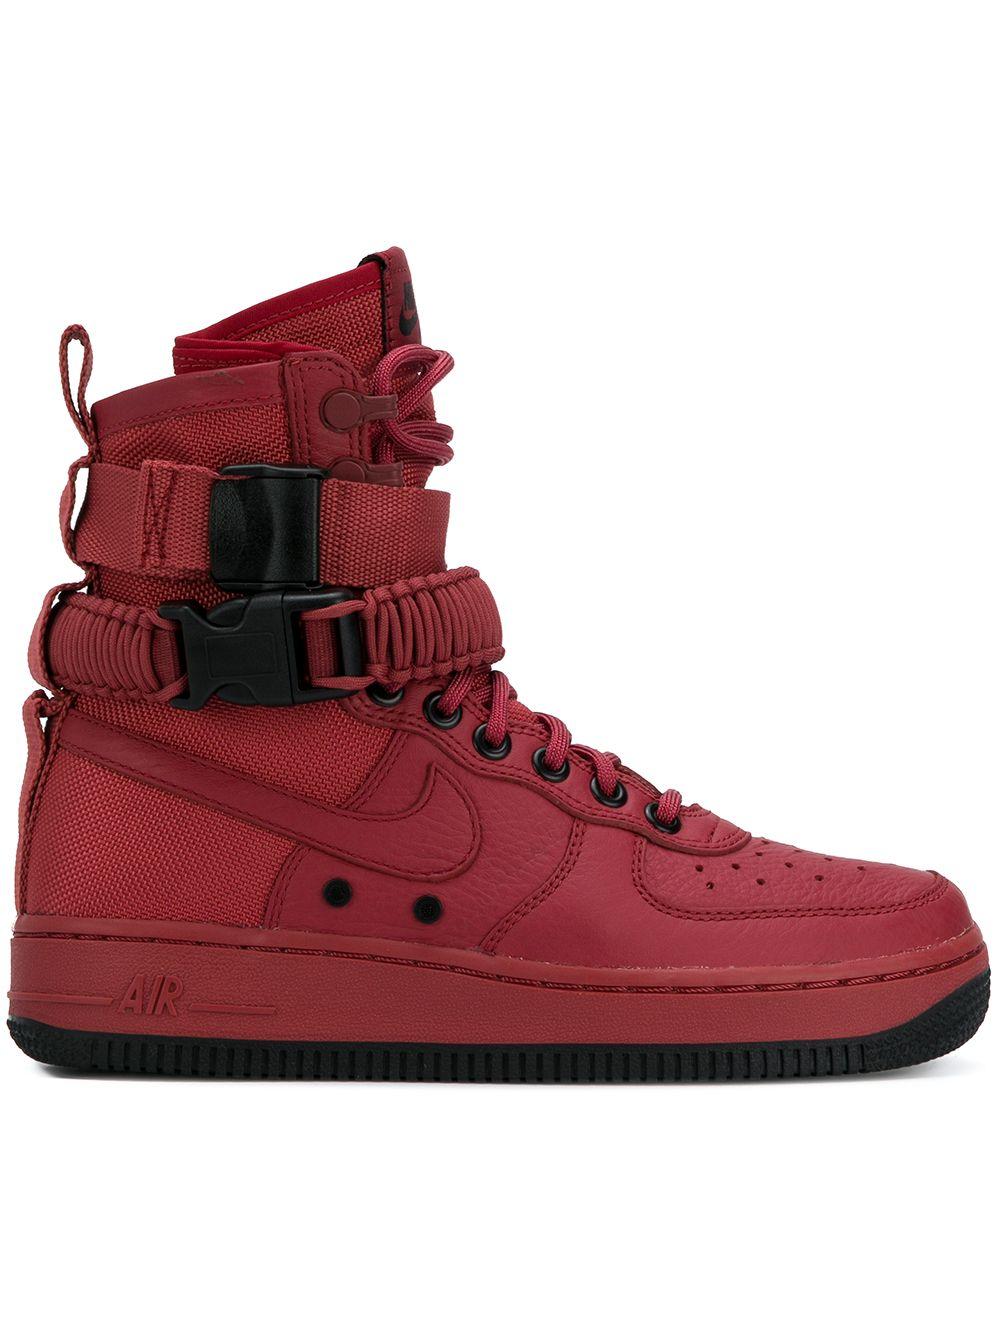 Nike Leather Sf Air Force 1 High Top Sneaker in Red - Lyst